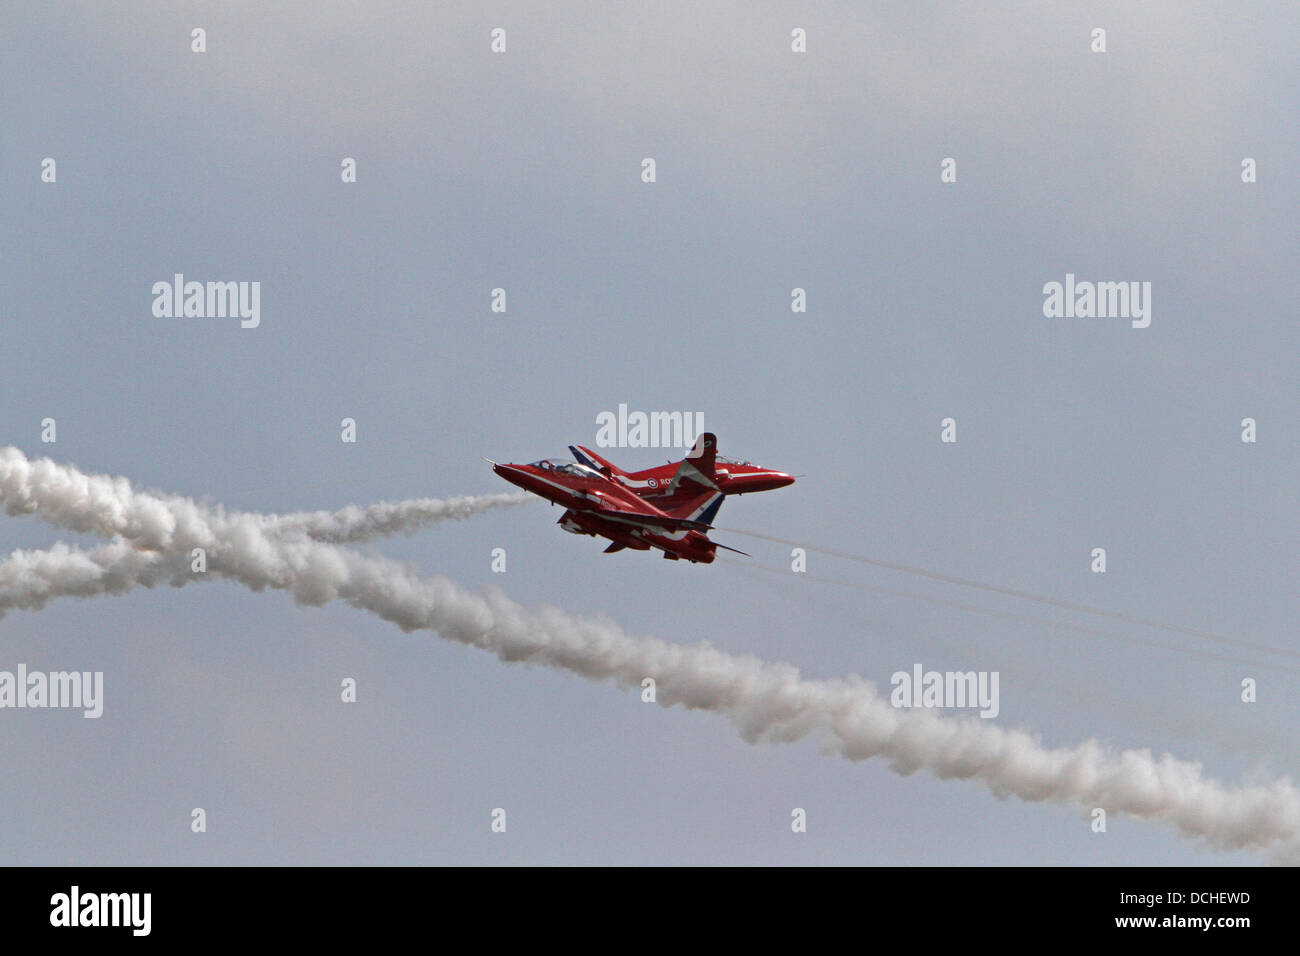 Eastbourne,UK,18th August 2013,The Red Arrows criss cross at 400mph in the sunshine during the Airbourne air display in Eastbourn Credit: Keith Larby/Alamy live News Stock Photo